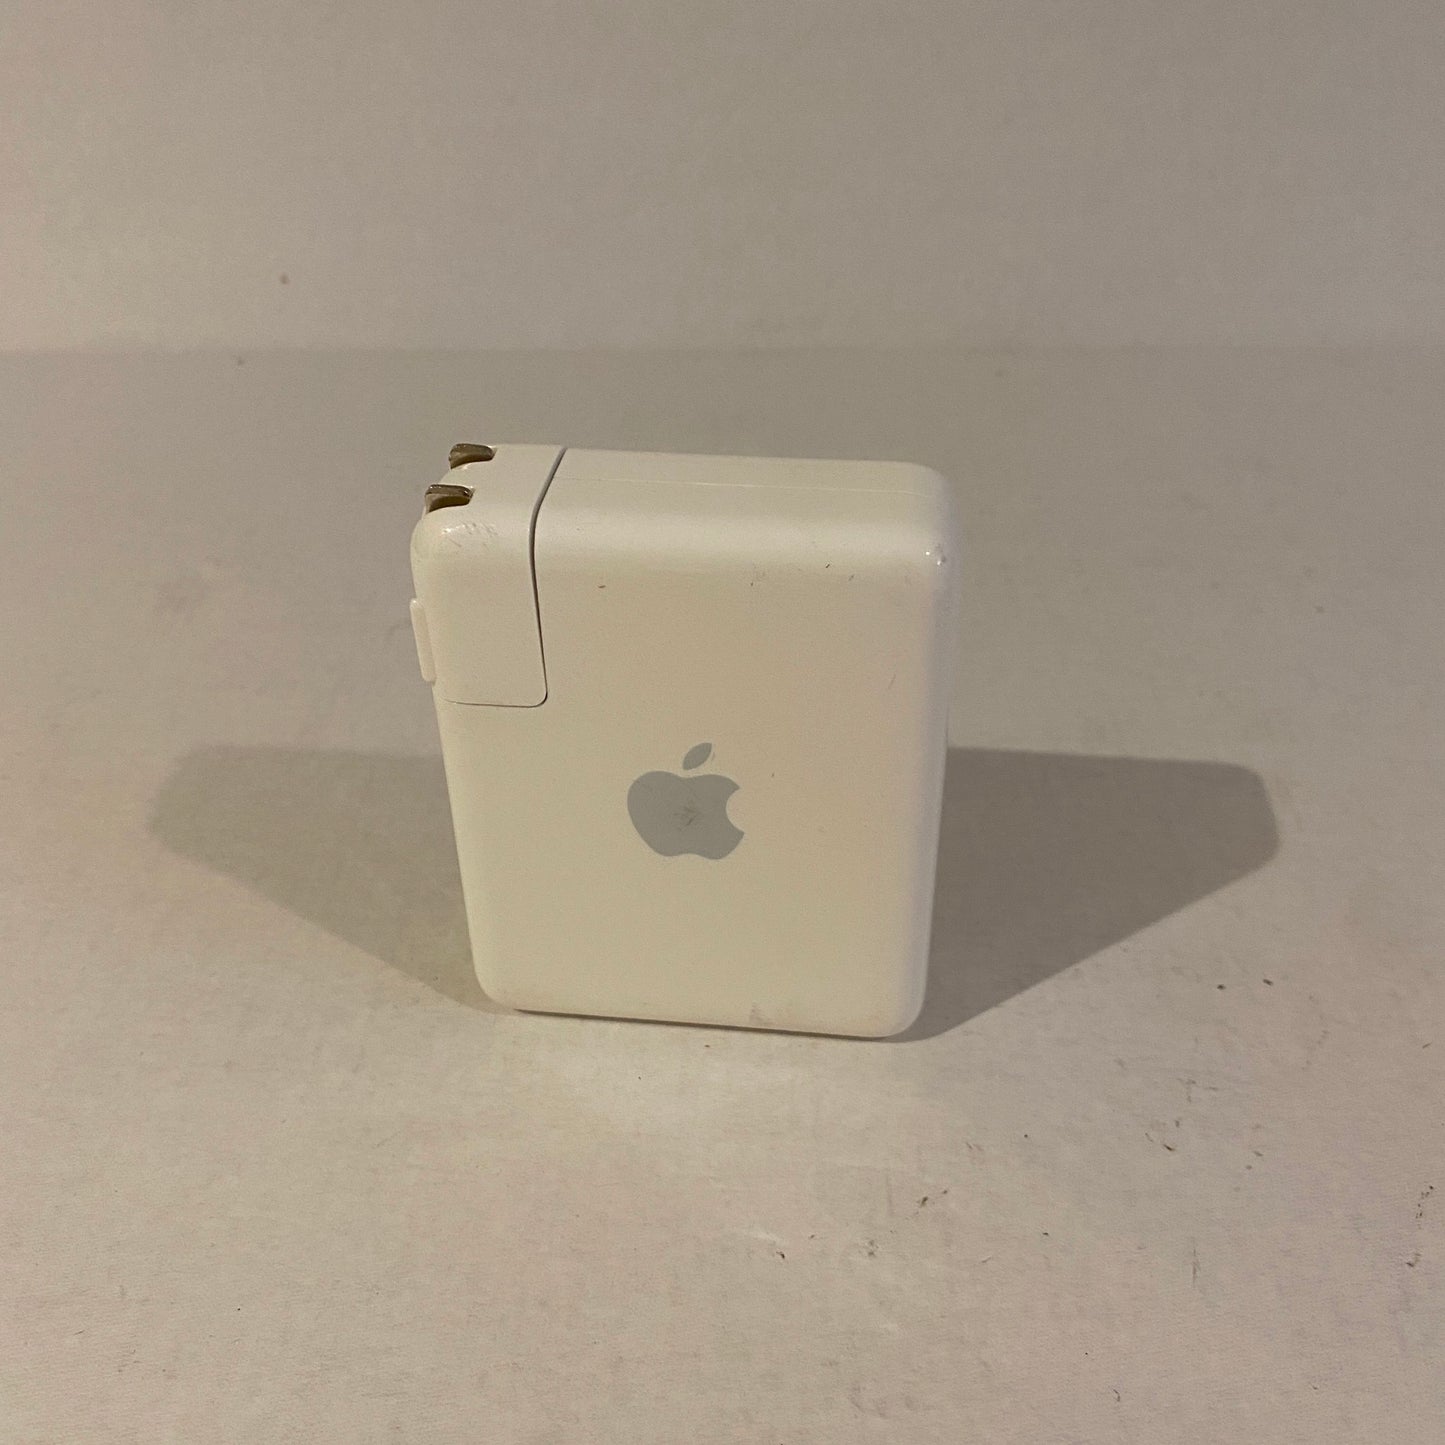 1st Generation Apple Airport Express Base Station - A1264